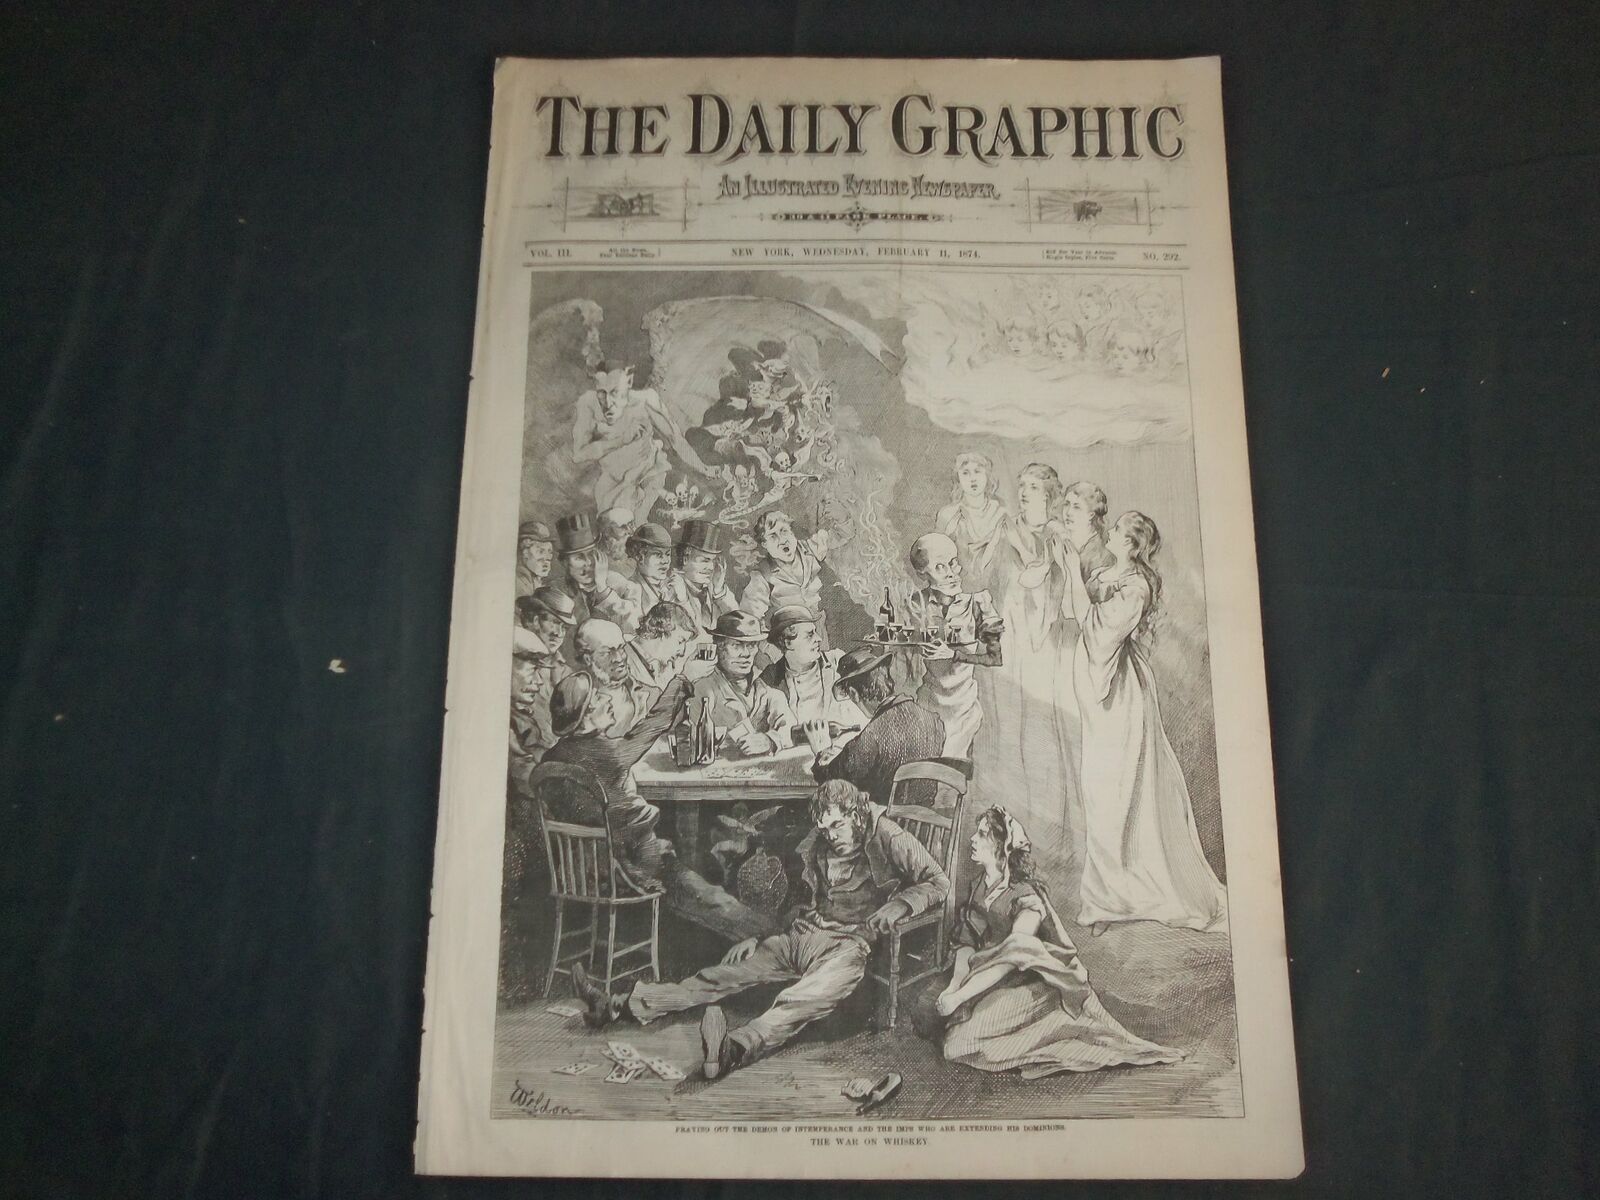 1874 FEBRUARY 11 THE DAILY GRAPHIC NEWSPAPER - THE WAR ON WHISKEY - NT 7647